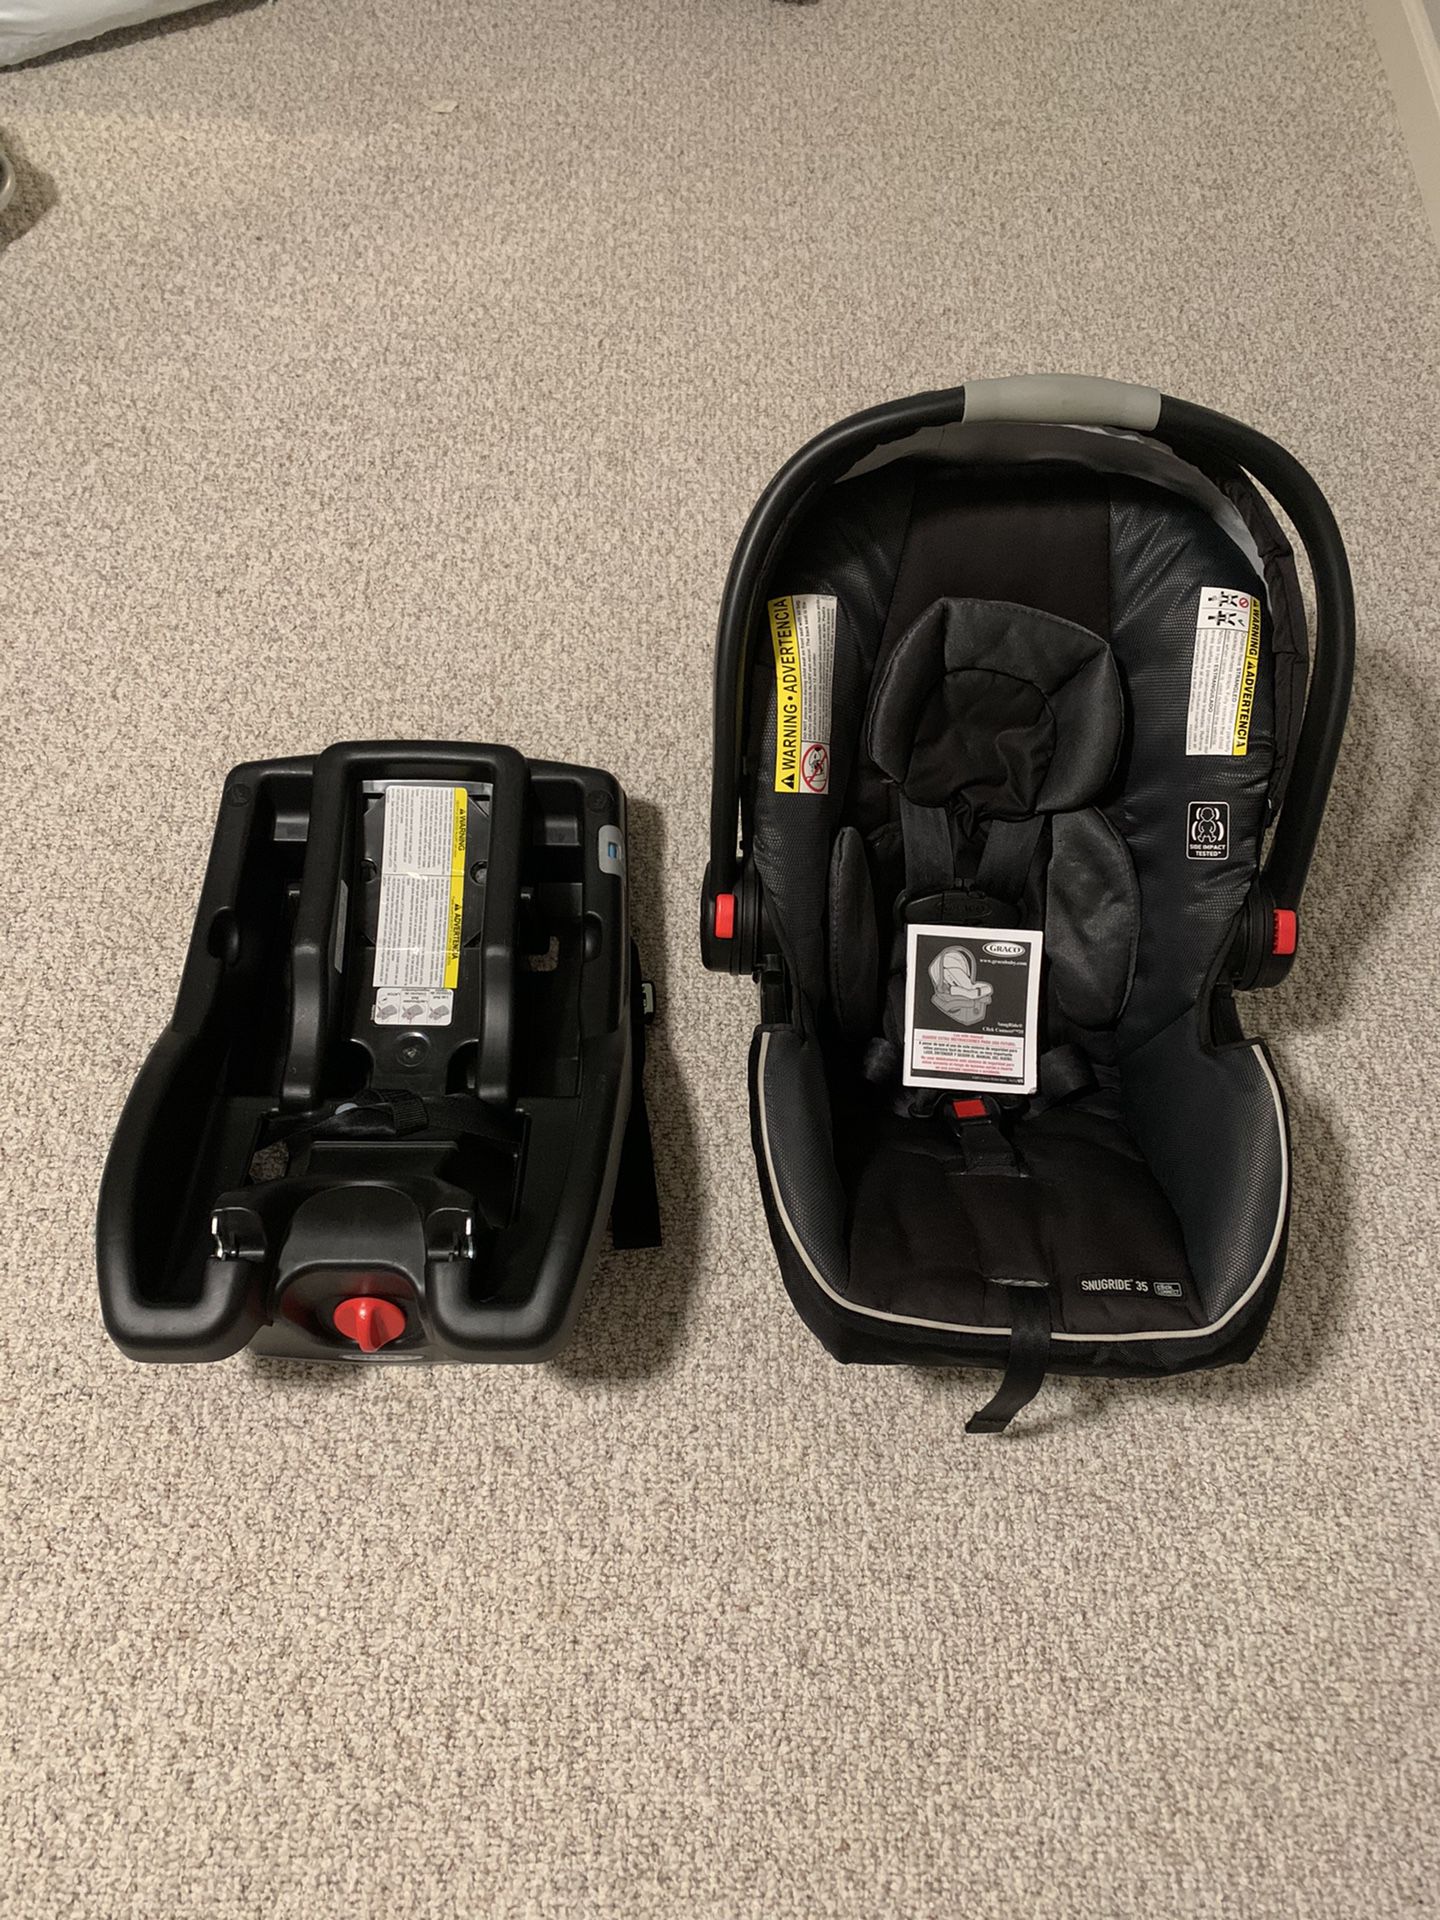 FREE Car seat - Greco SnugRide 35 (infant). Must go but we don’t want to waste it - ready for use!